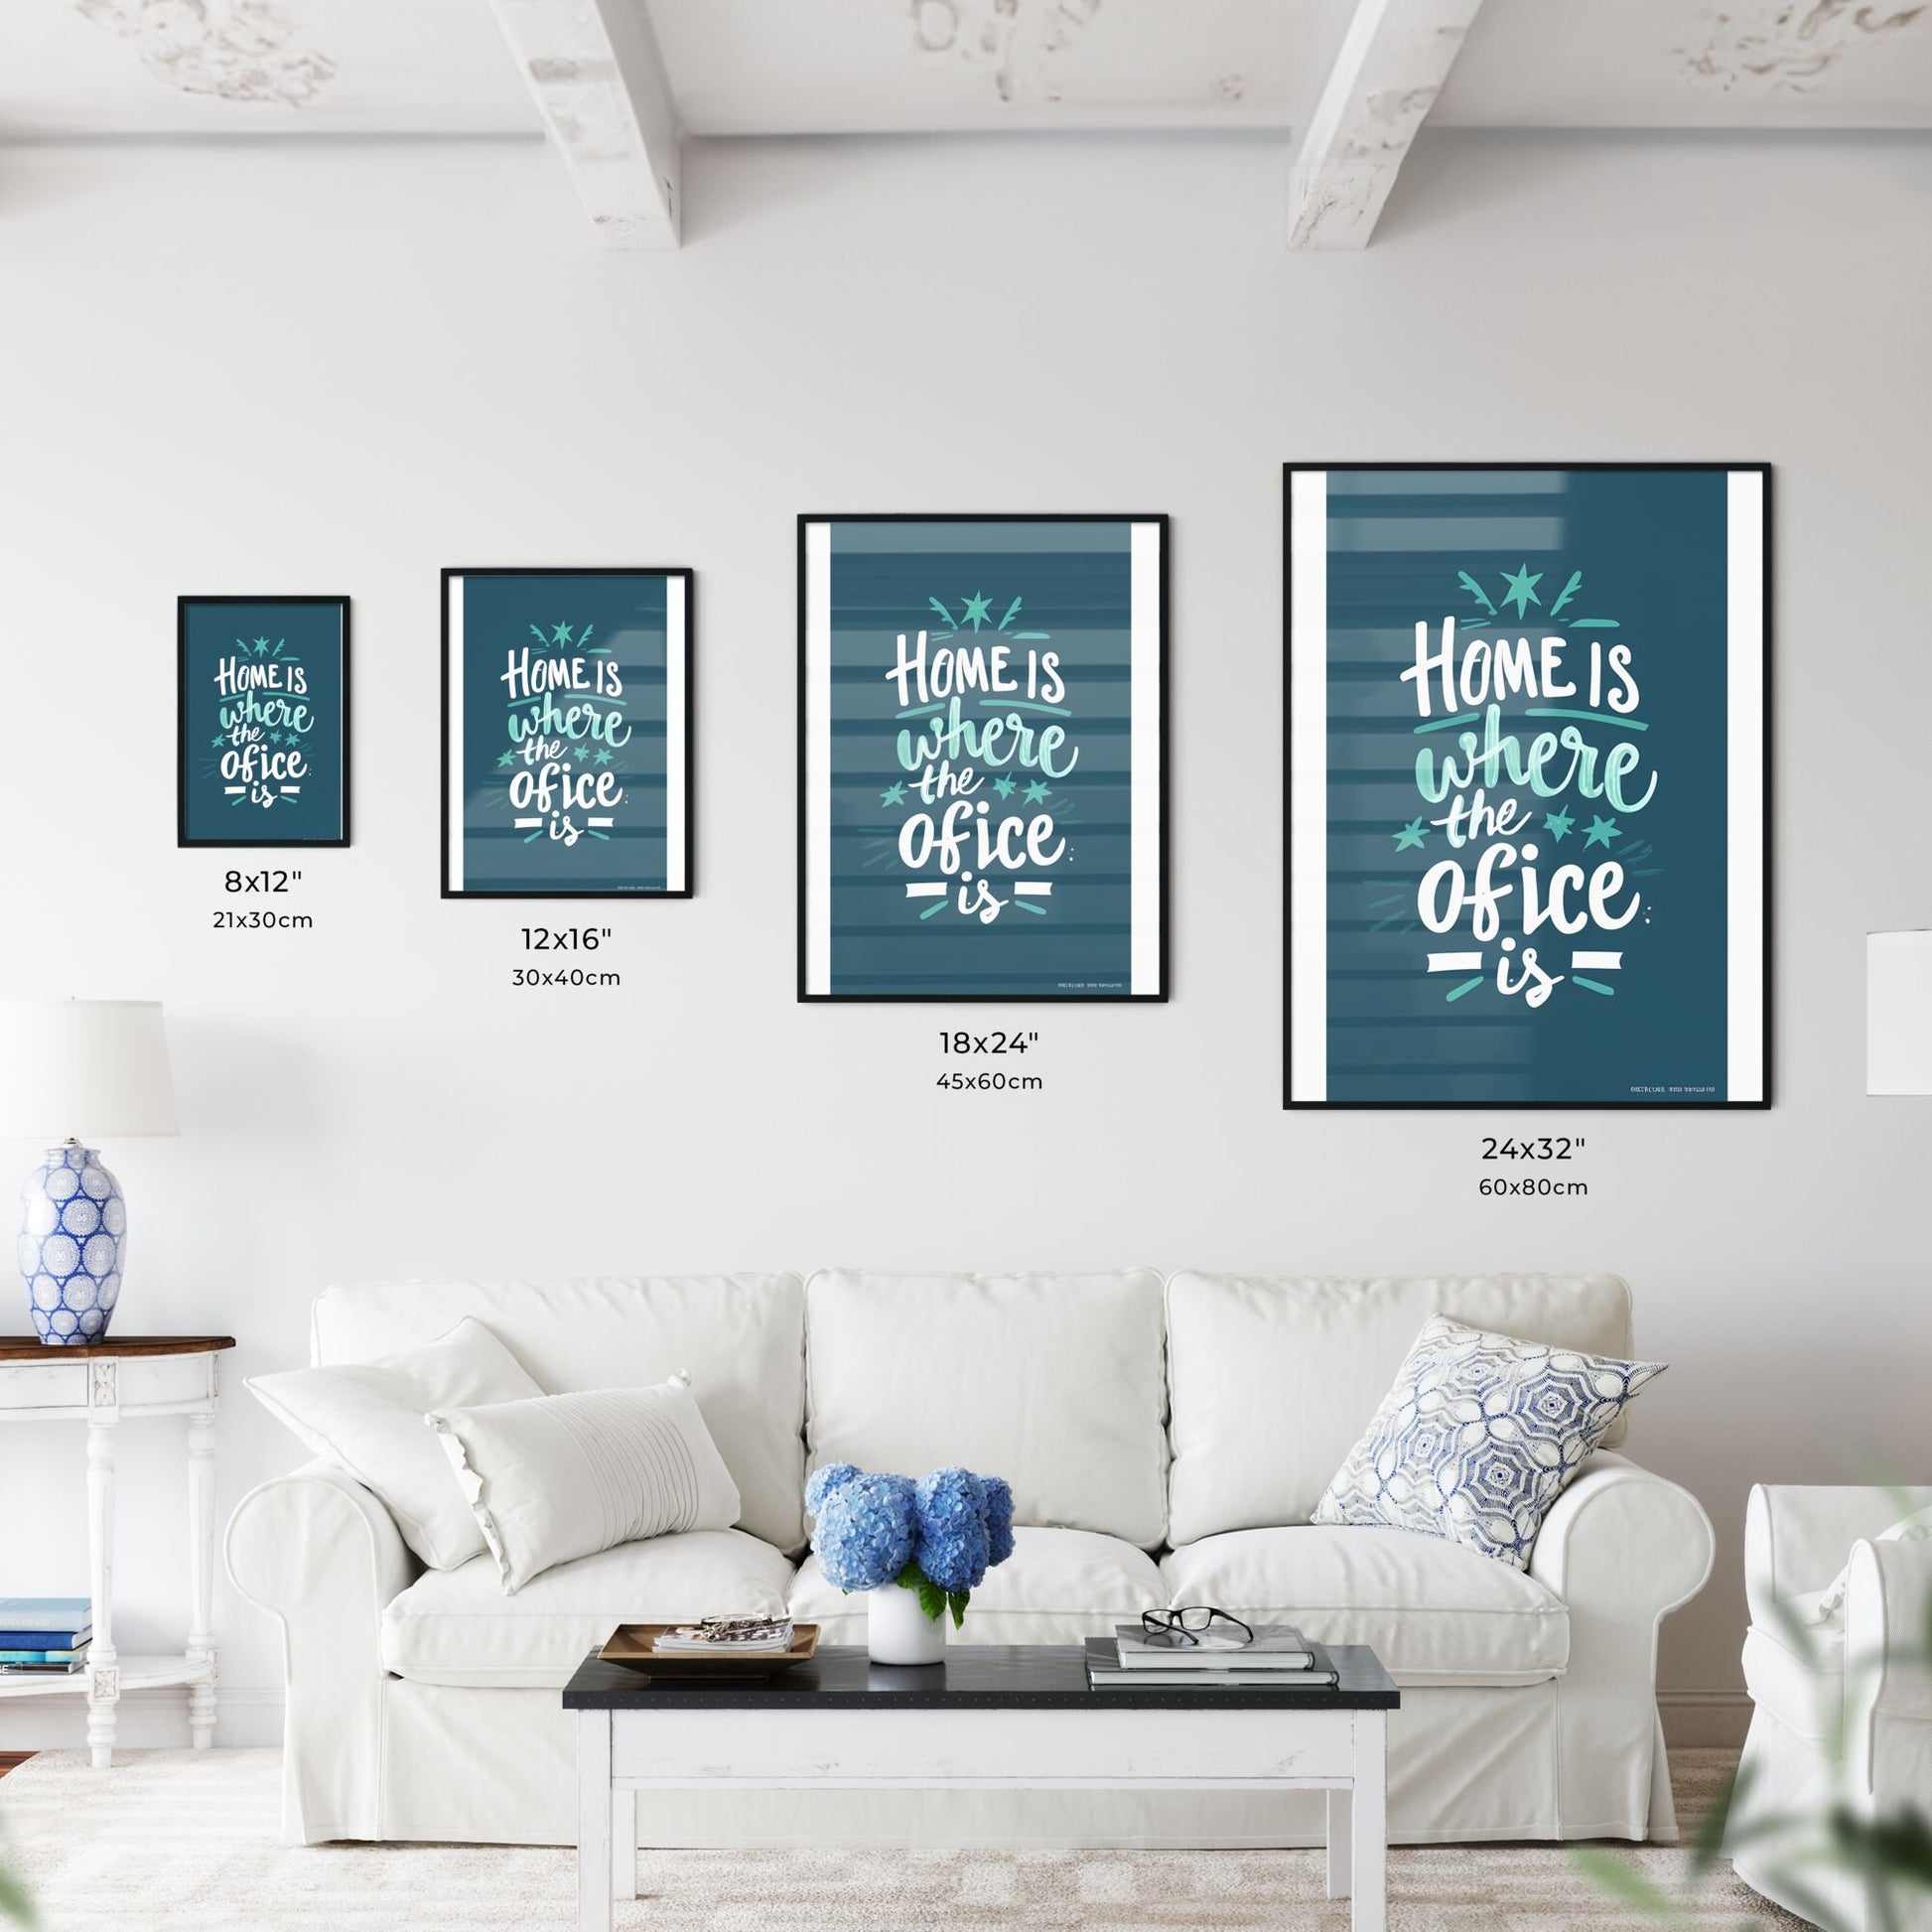 Home Is Where The Office Is - A Blue And White Sign With White Text Art Print Default Title